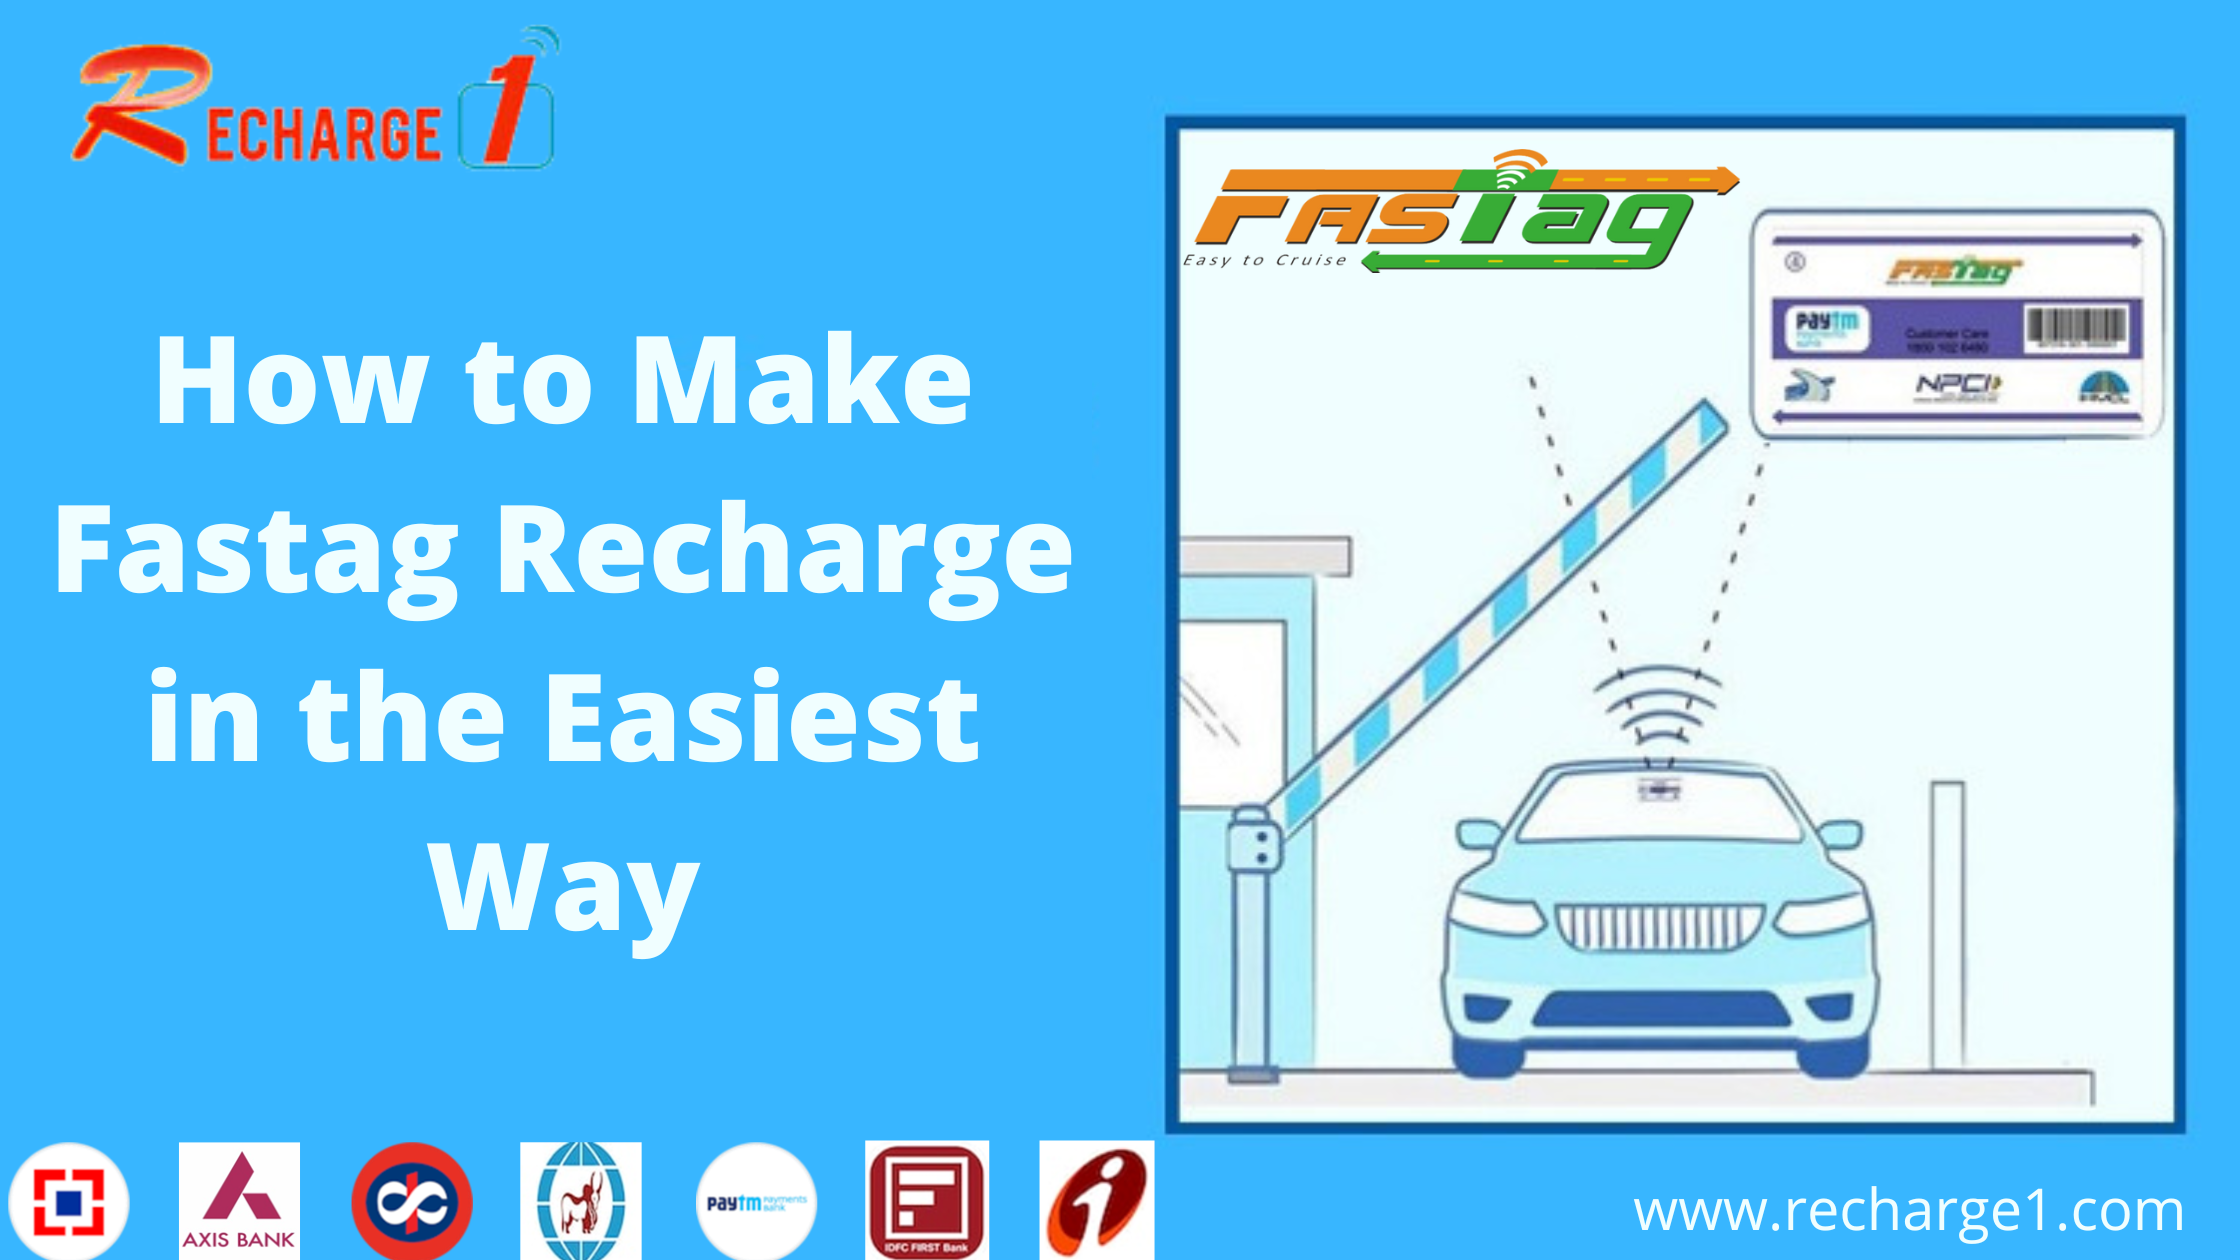 How to Make Fastag Recharge in the Easiest Way?